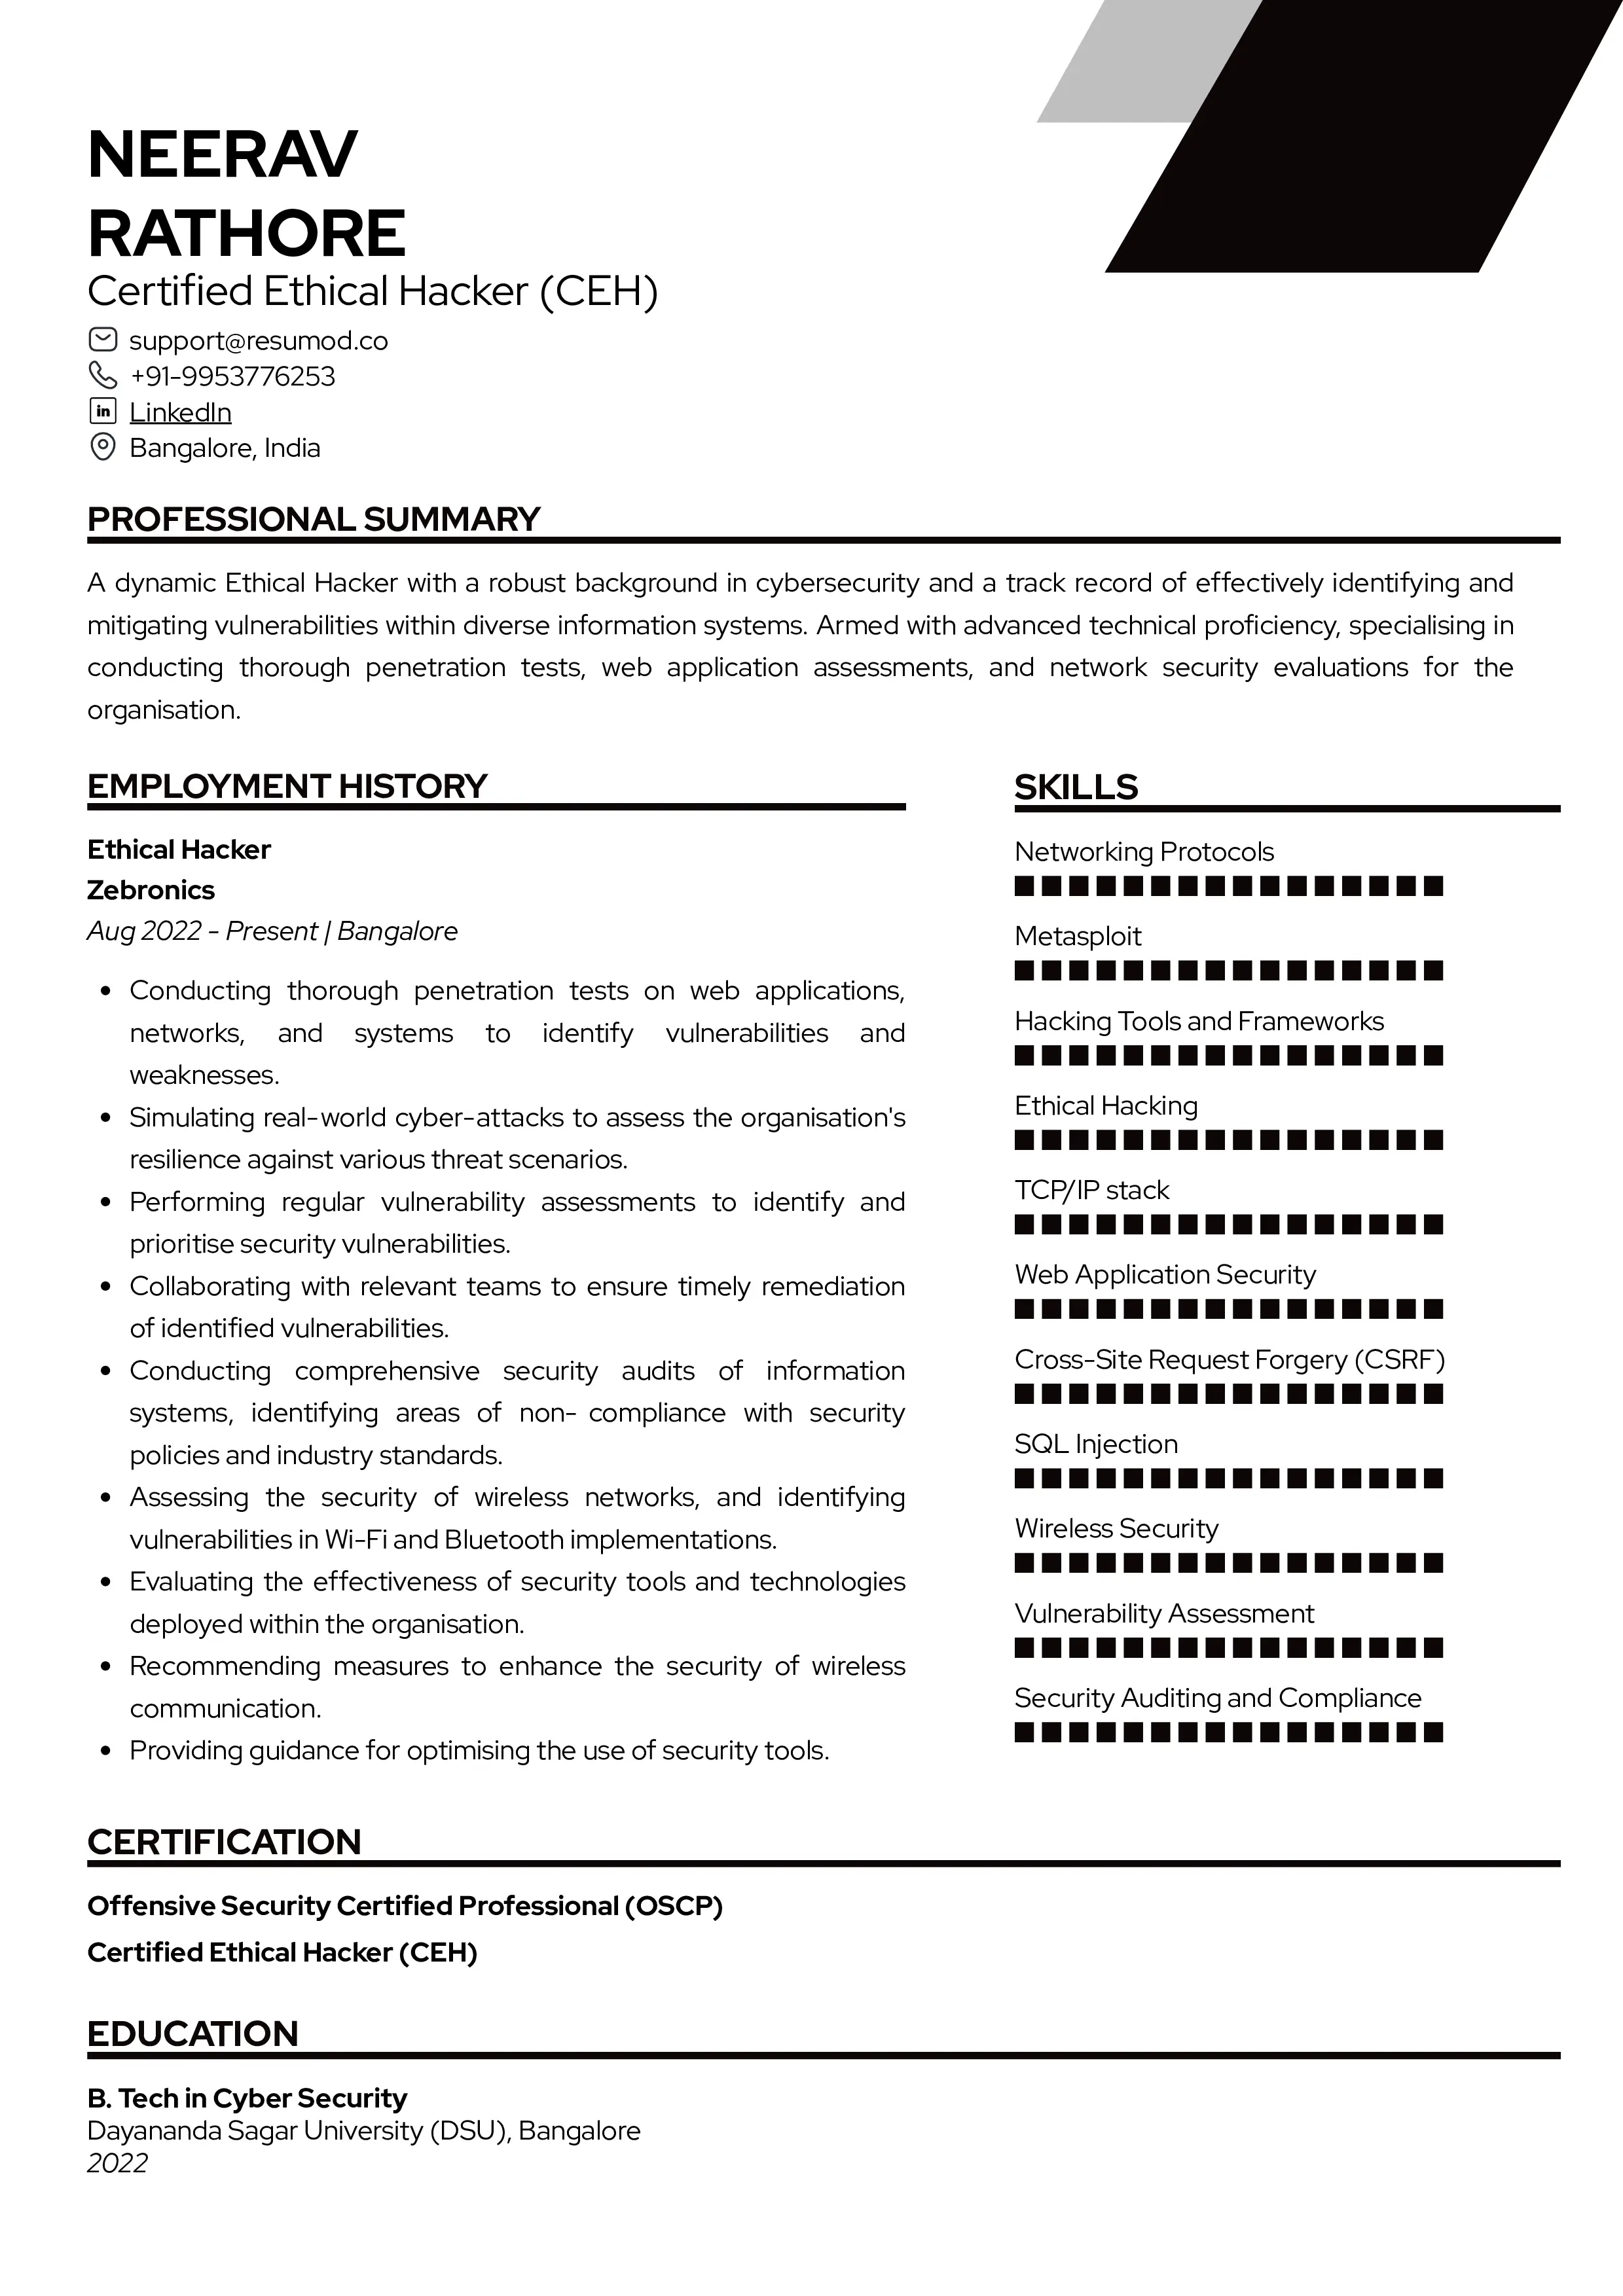 Sample Resume of Ethical Hacker | Free Resume Templates & Samples on Resumod.co